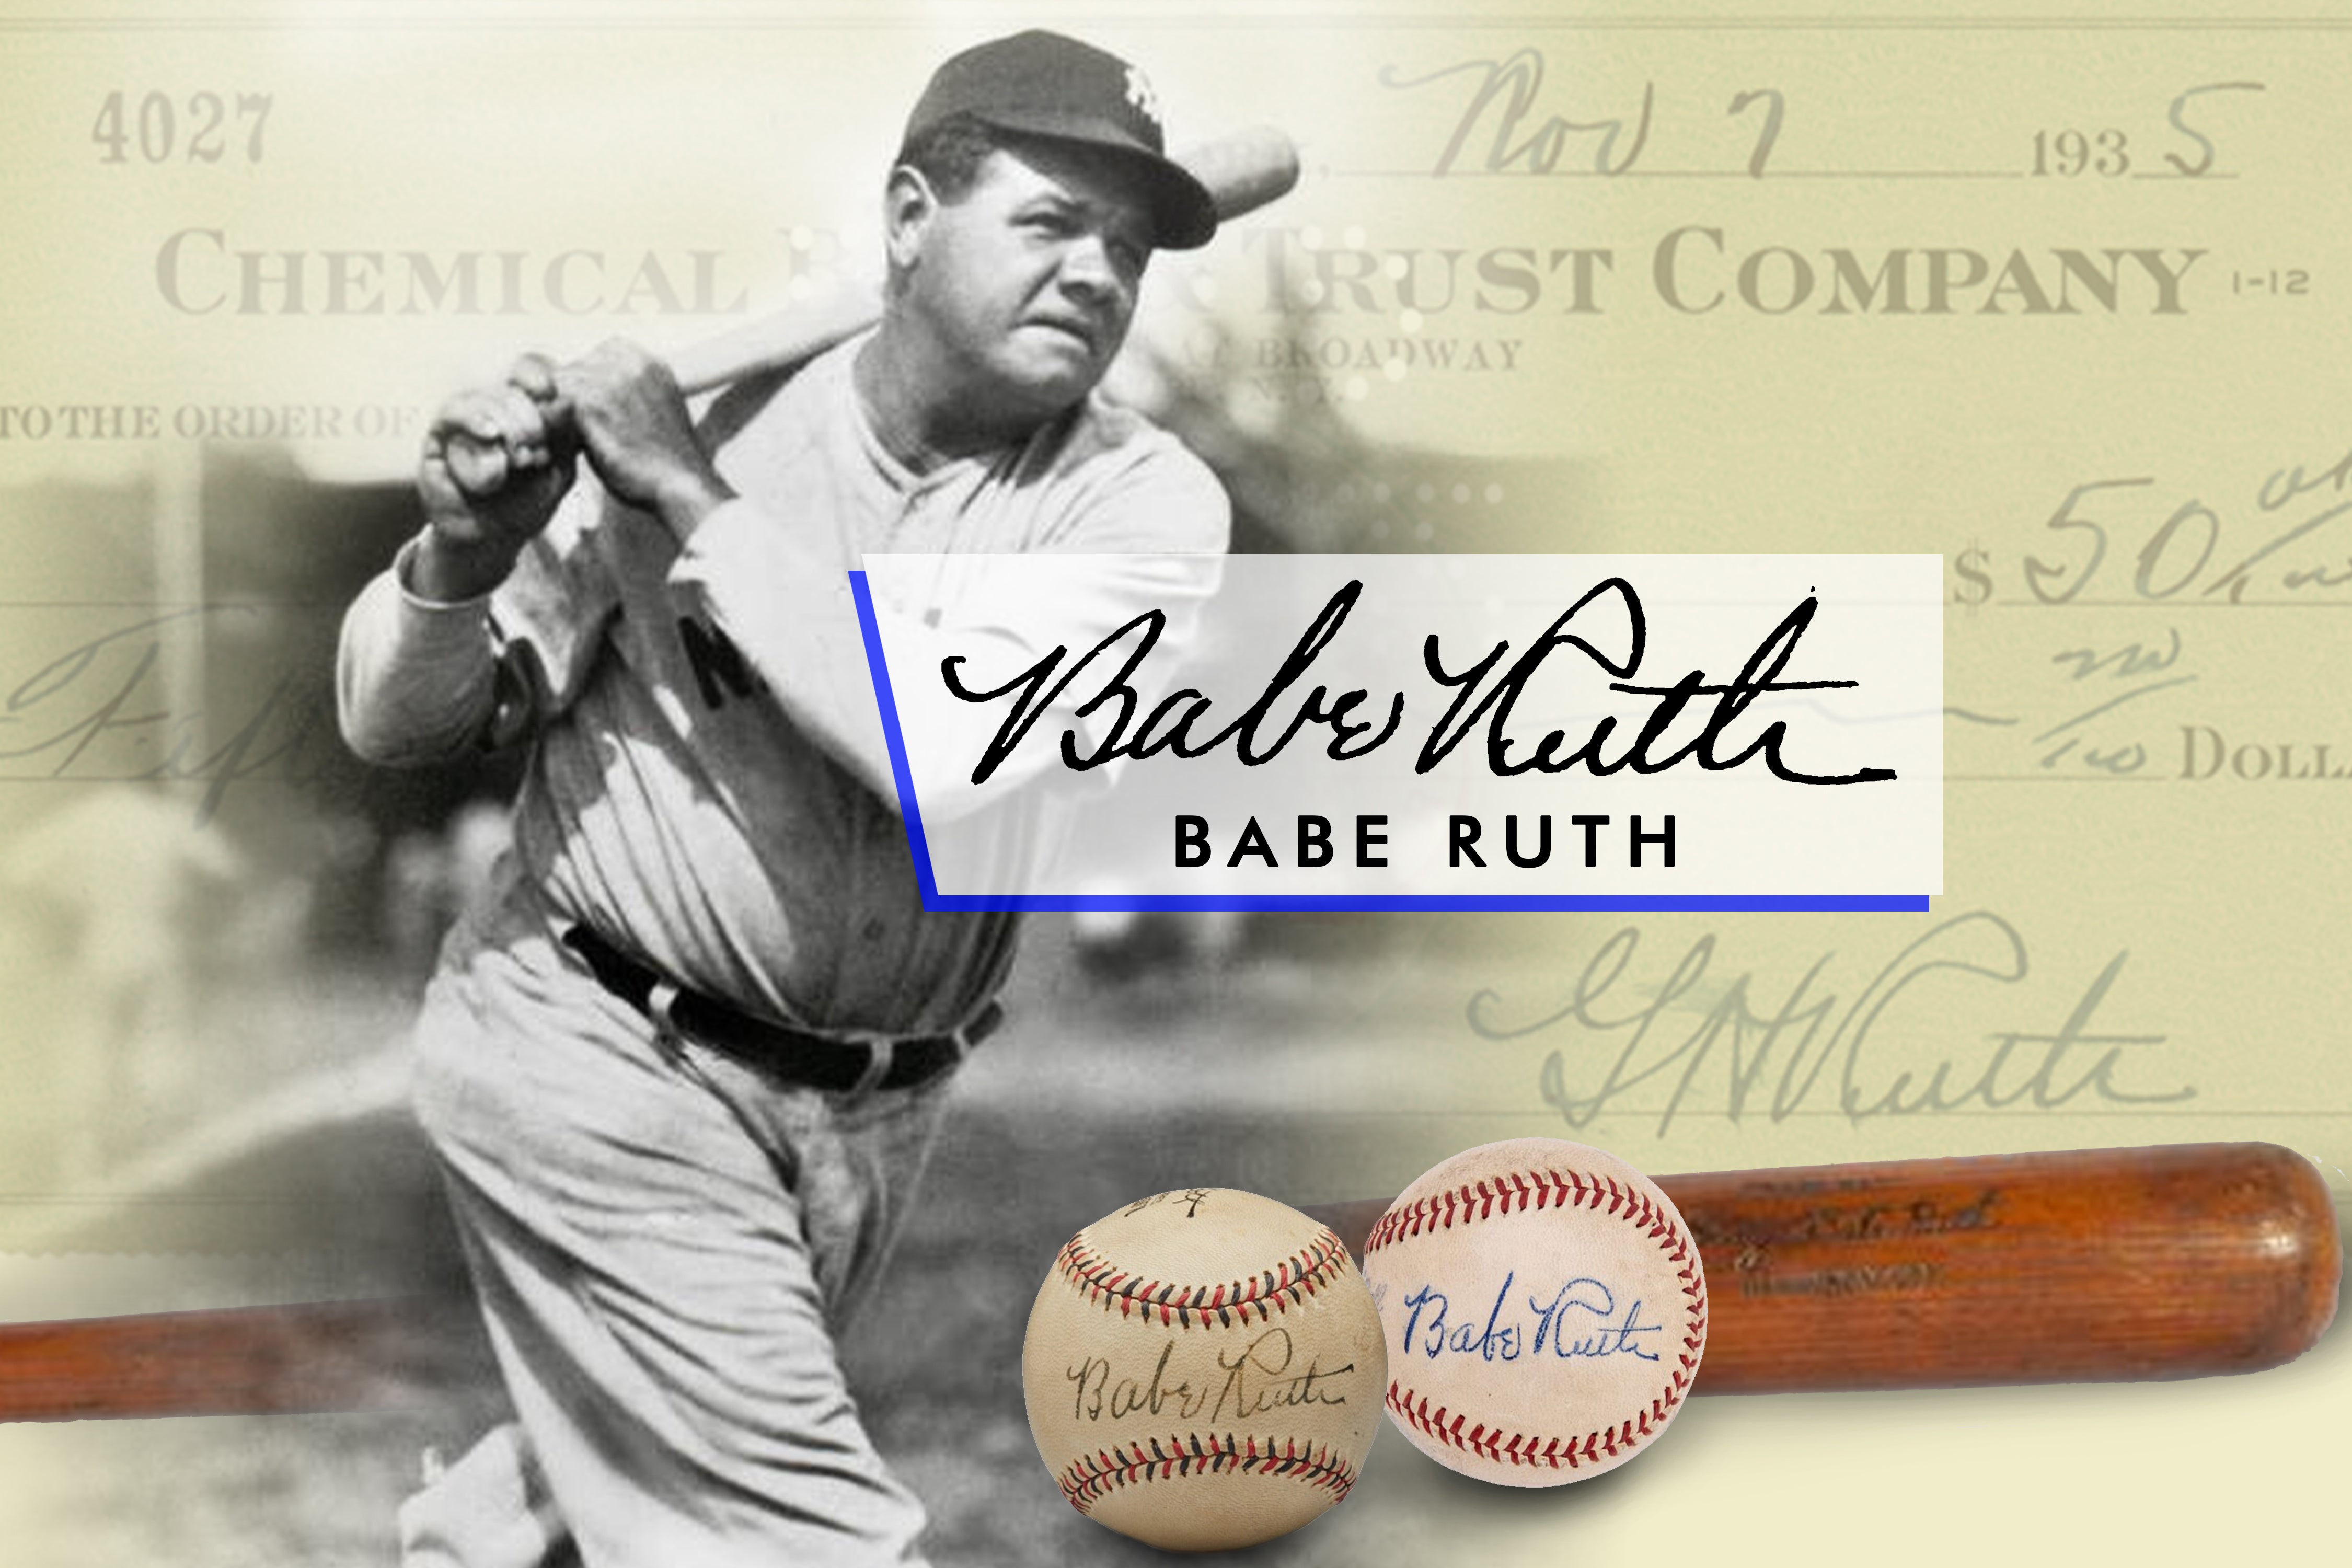 Ruth jersey sells for more than $4.4 million at auction